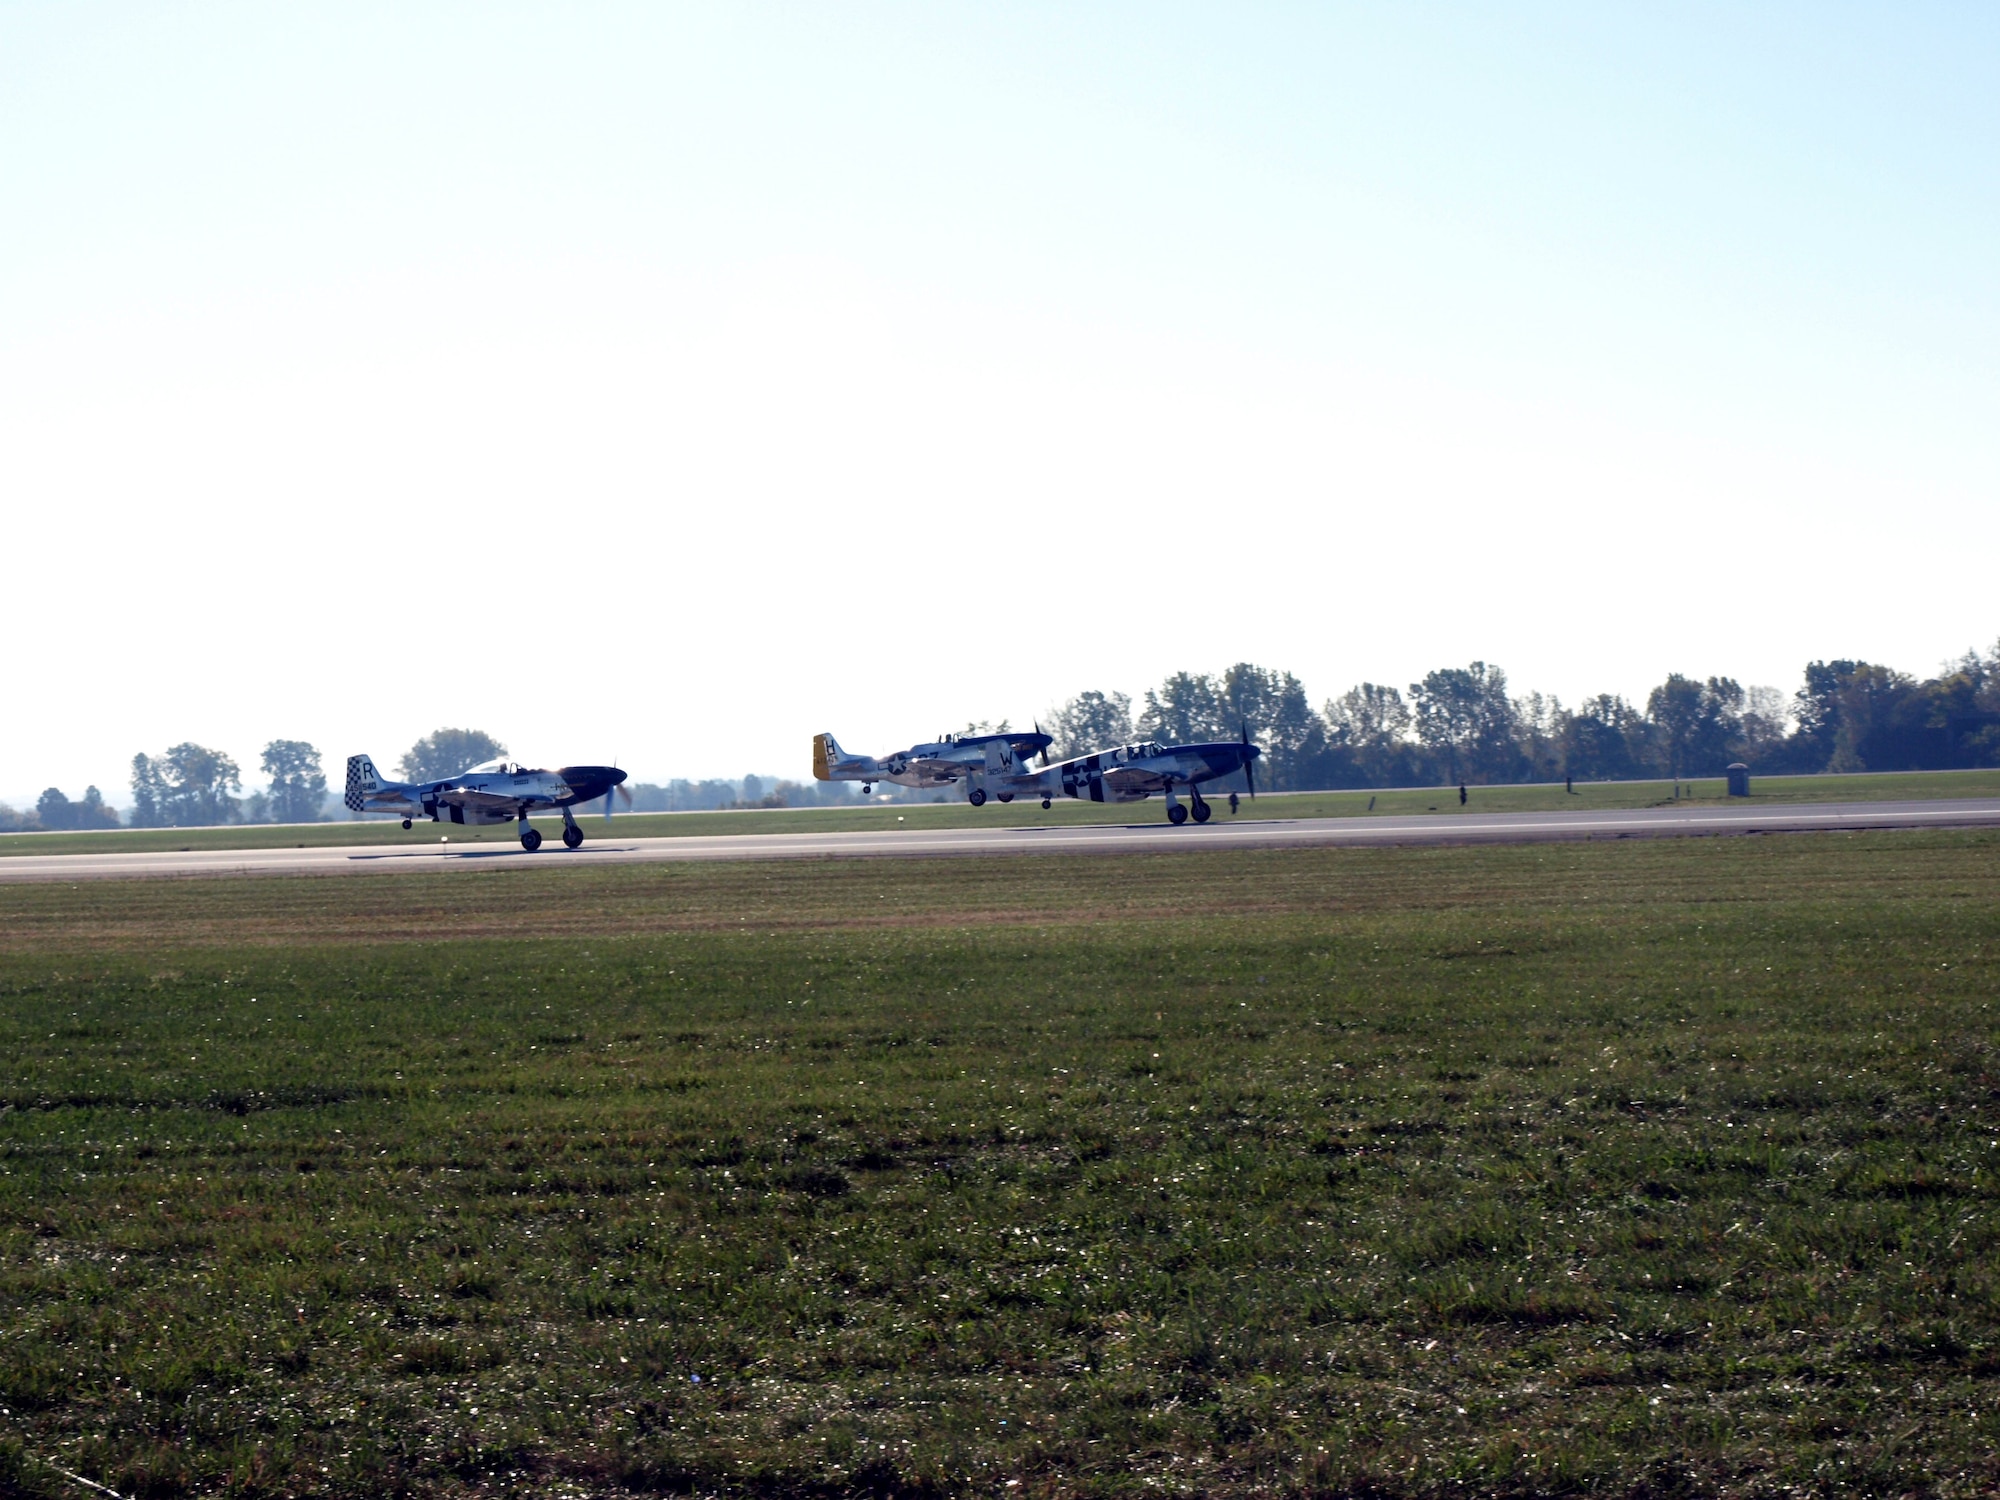 Three Mustangs take to the air during the 2007 second, and final, Gathering of Mustangs and Legends at Rickenbacker International Airport outside Columbus, Ohio. The first GML was held in April 1999 with 65 Mustangs. In 2007, the ramp at Rickenbacker held more than 150 Mustangs and other warbirds. (Air Force photo by Ron Scharven)